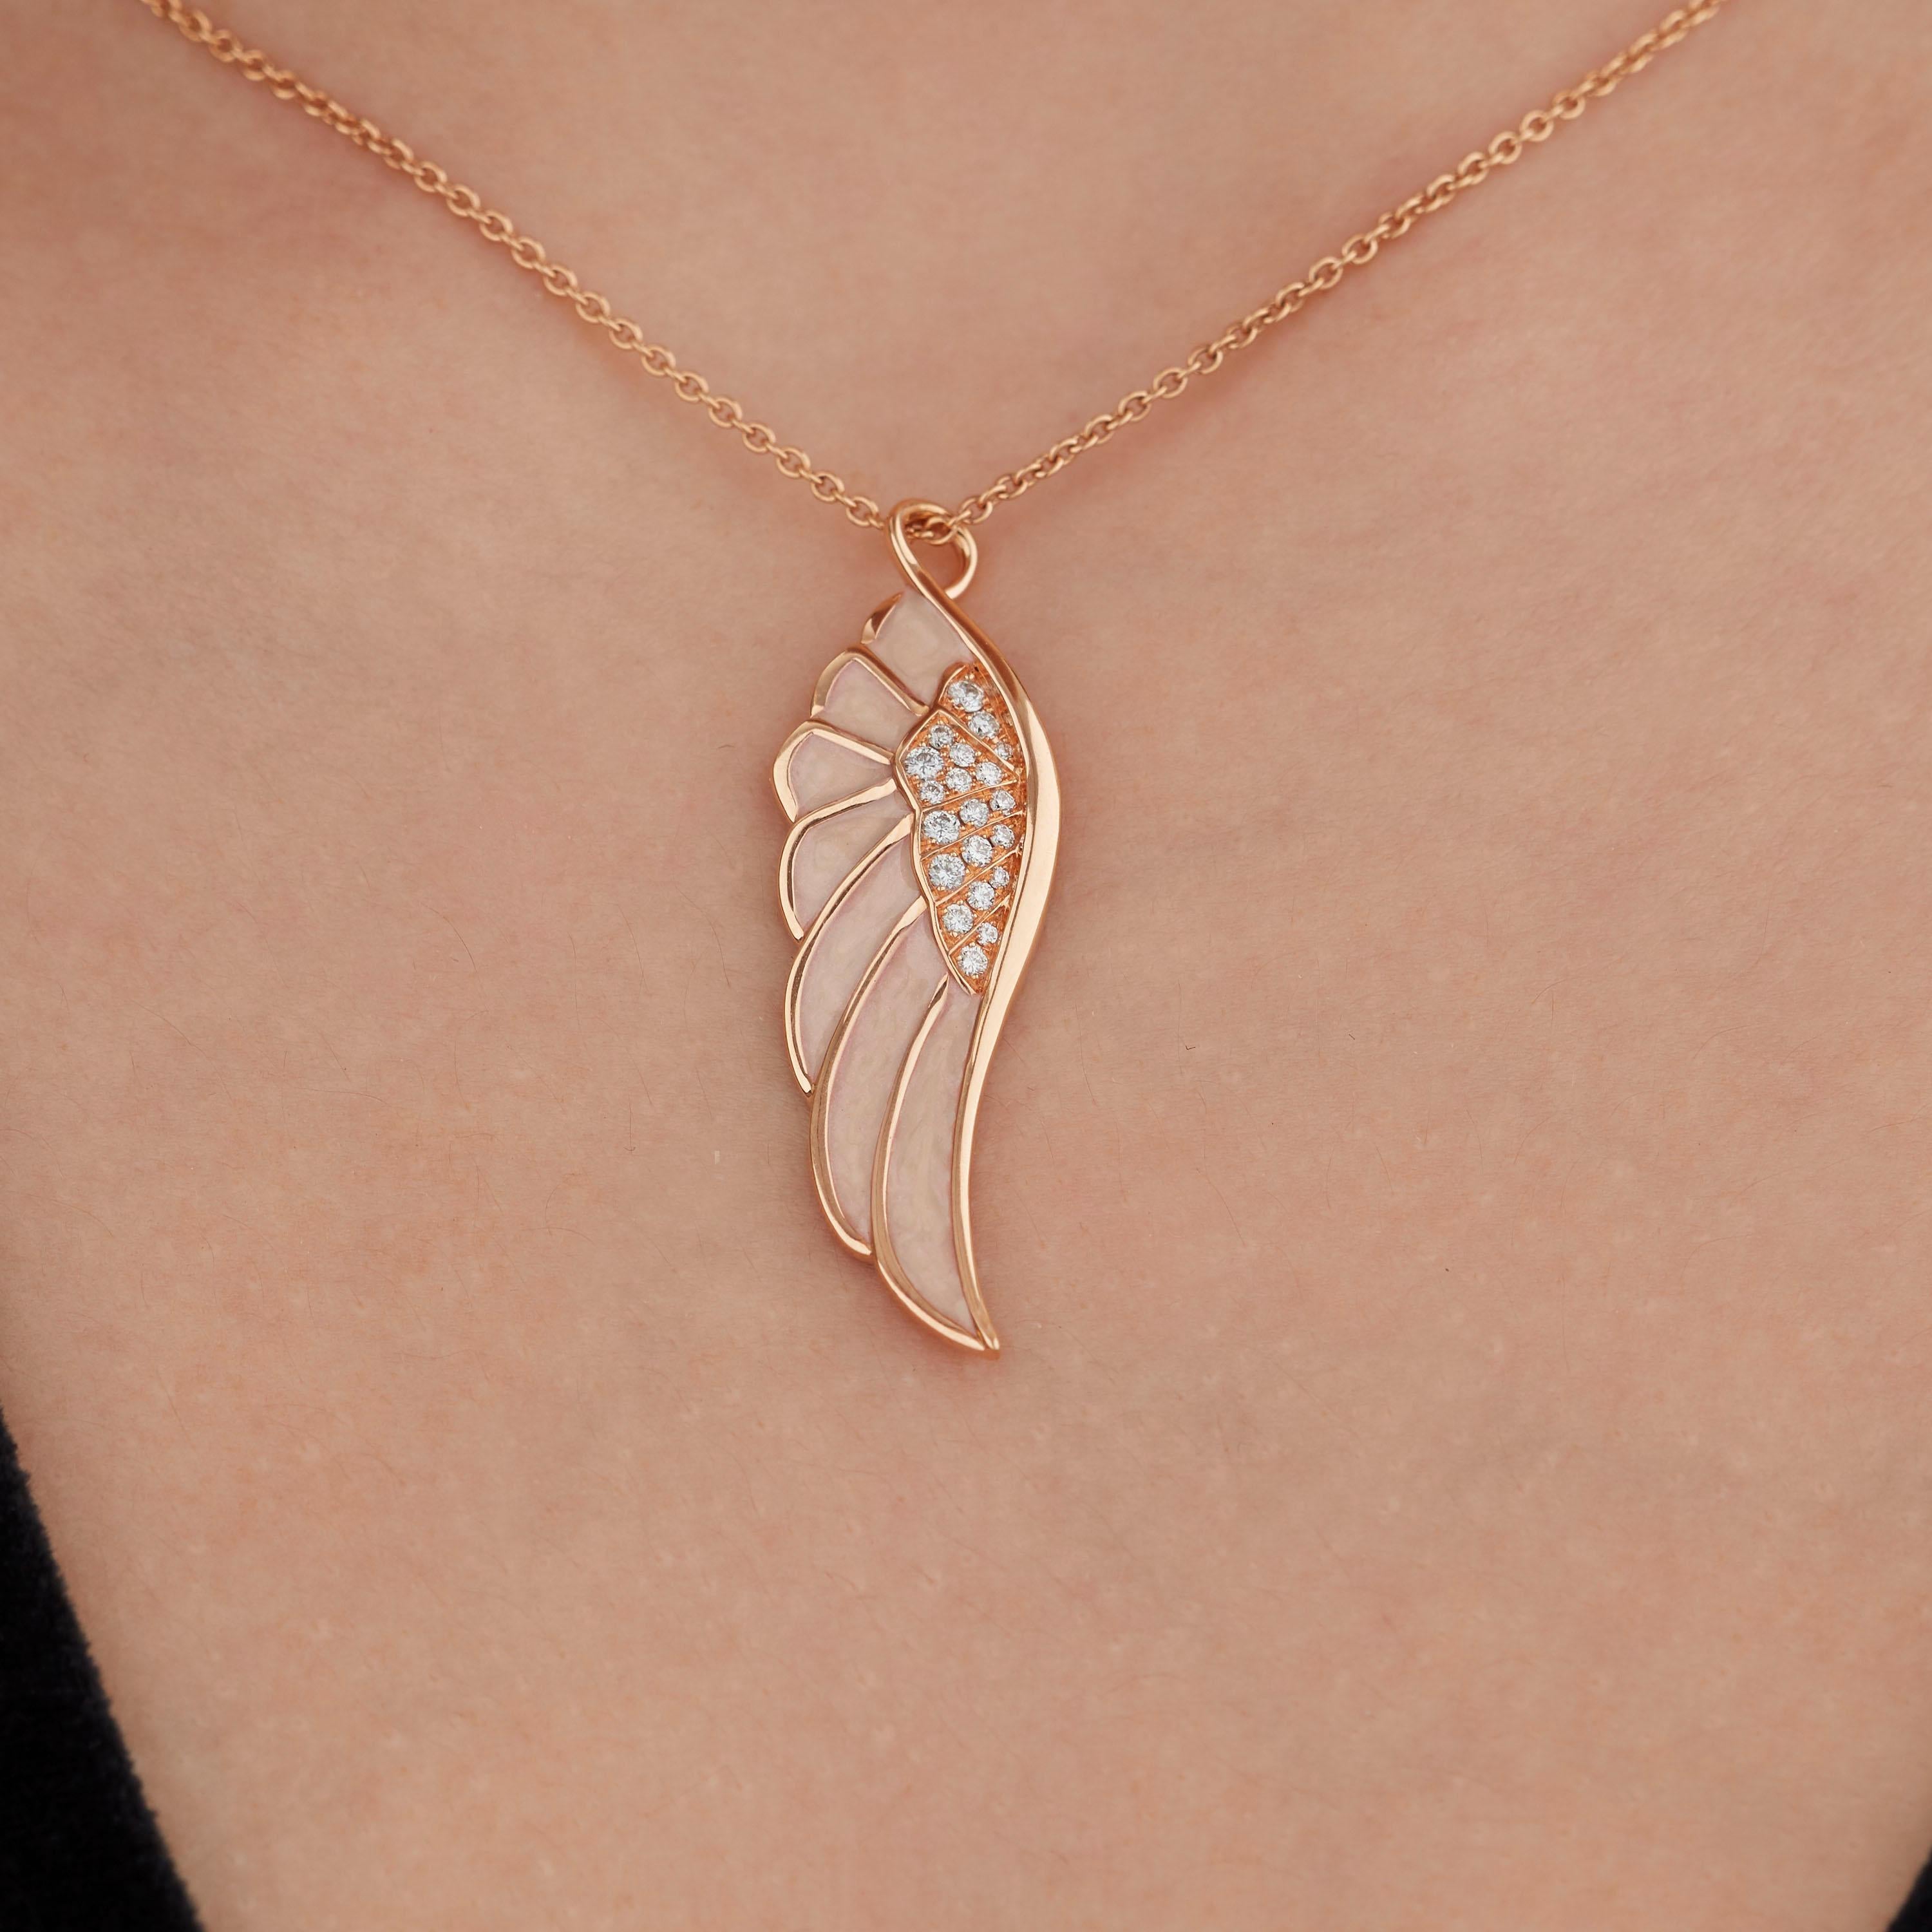 A House of Garrard 18 karat rose gold medium pendant from the 'Wings Reflection' collection, set with round white diamonds and 'Spring' coloured enamel.

20 round white diamonds weighing: 0.20cts

The House of Garrard is the longest serving jeweller